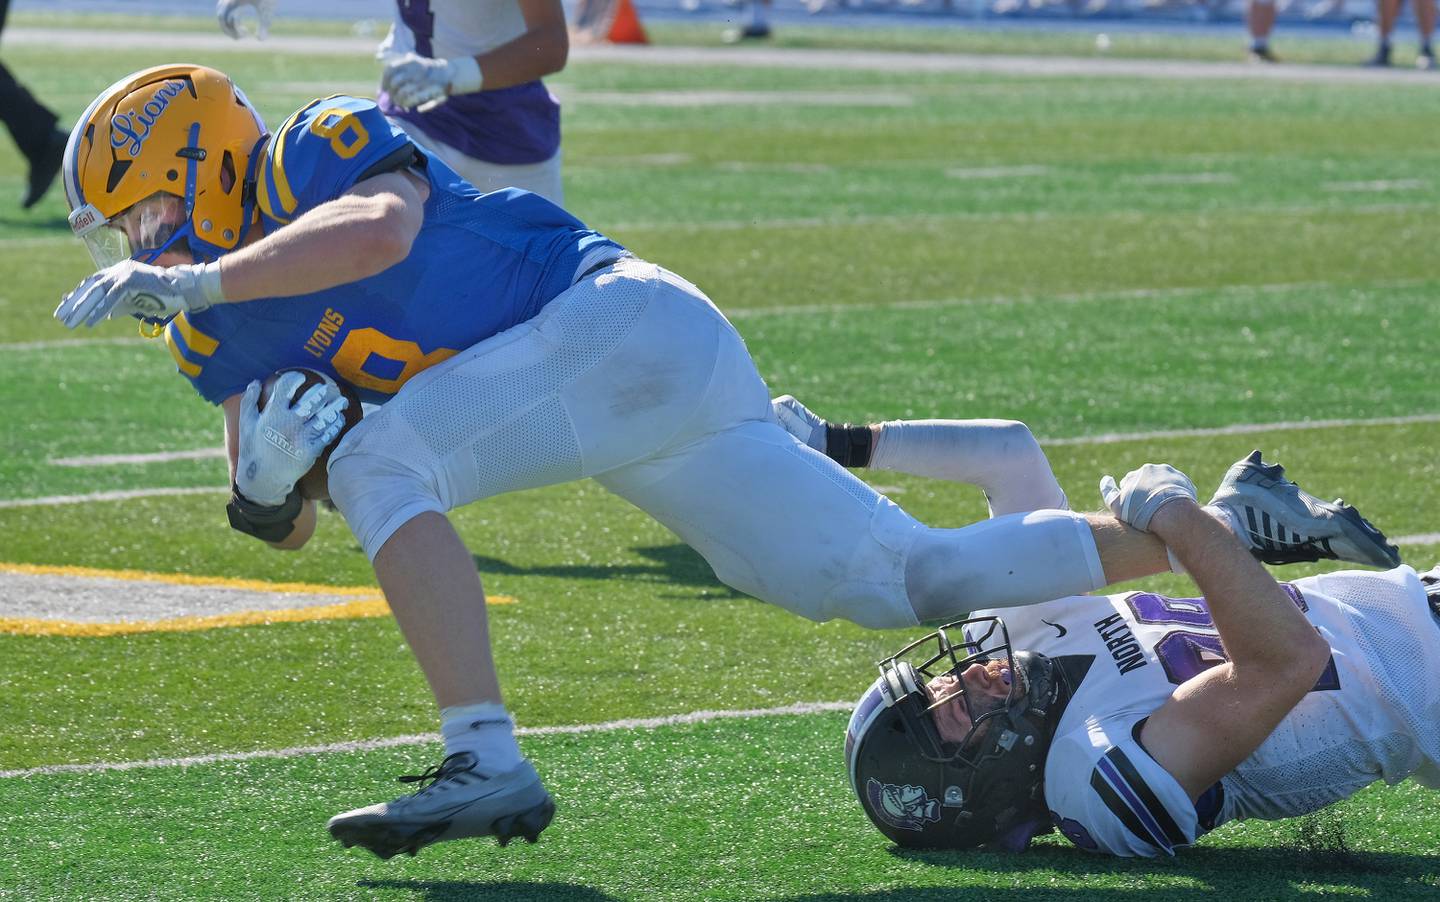 Downers Grove North's Josh Lambert (right) makes a shoestring tackle of Lyons Township's Danny Pasko (8) during a game on Oct. 22, 2022 at Lyons Township High School in LaGrange.